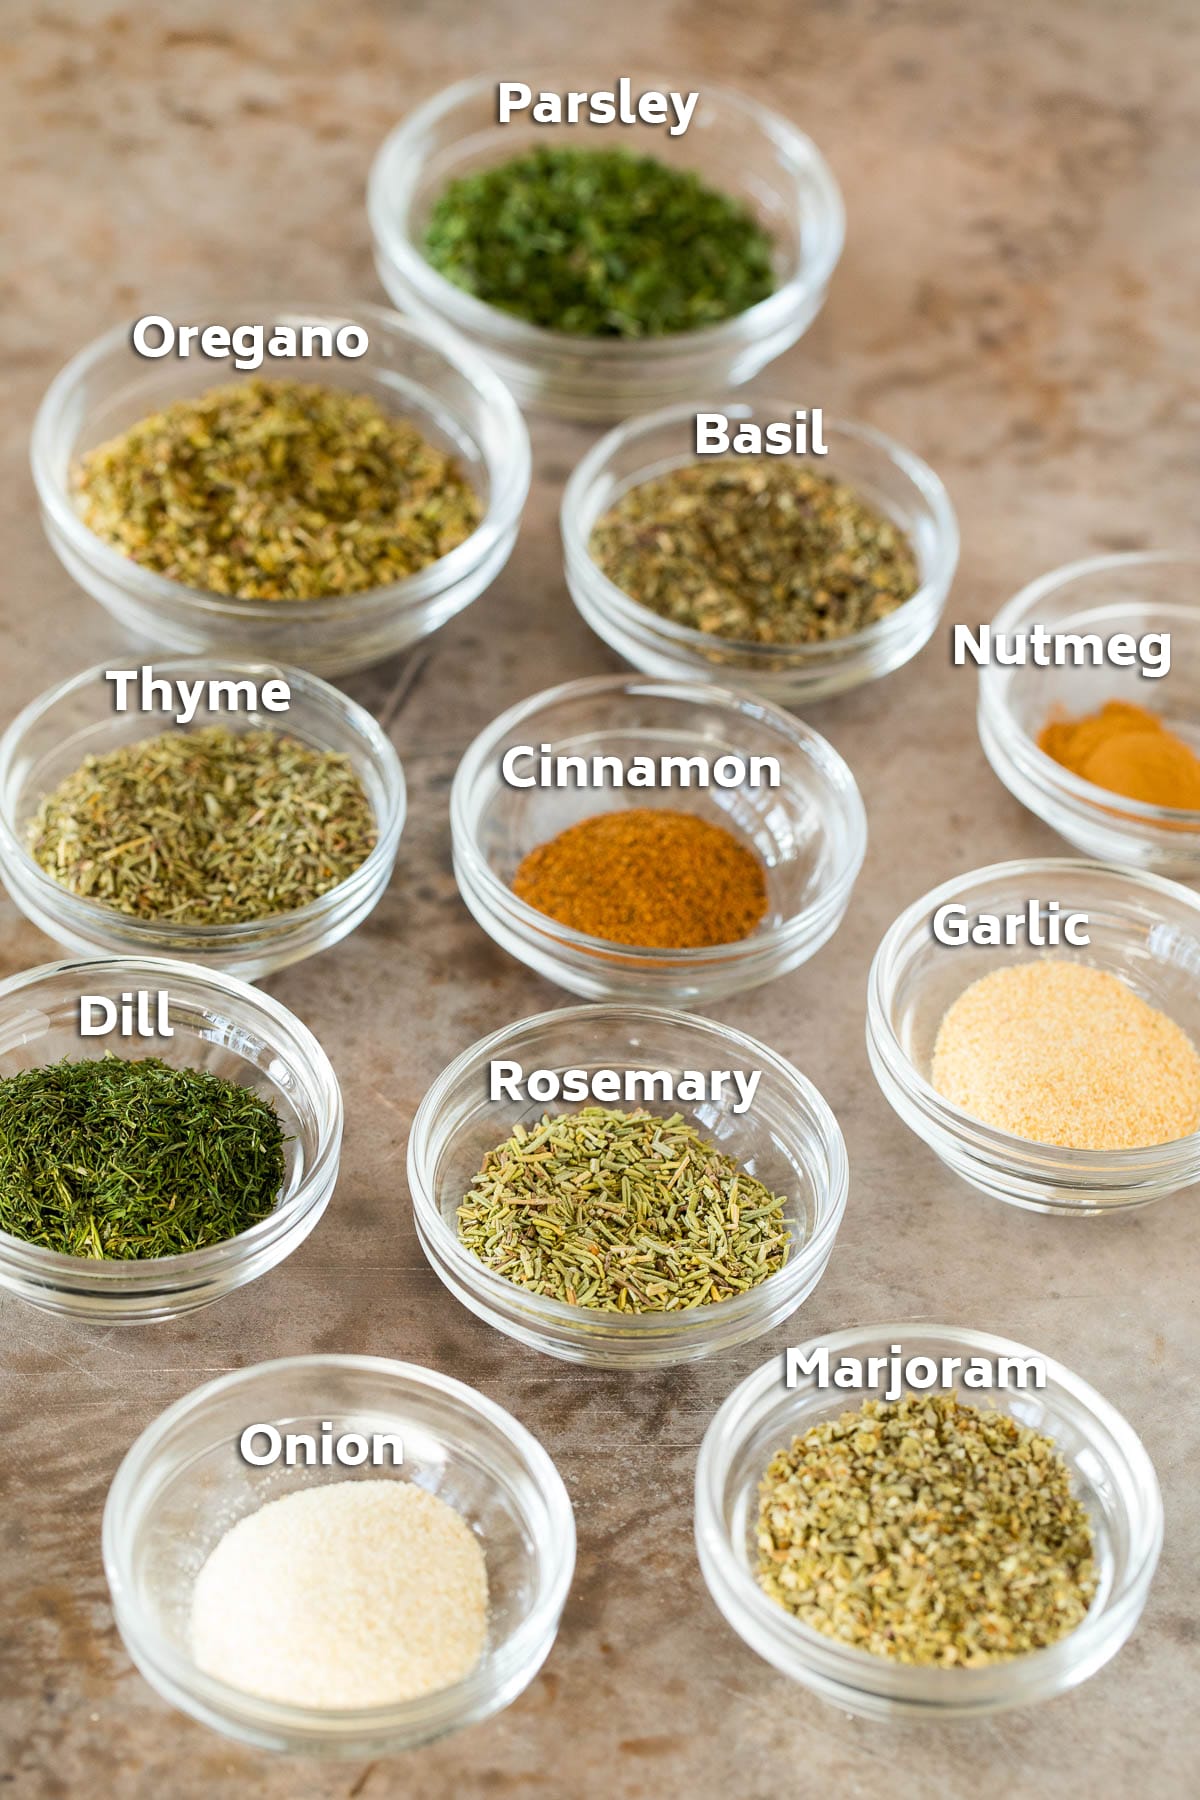 Bowls of various herbs and spices.